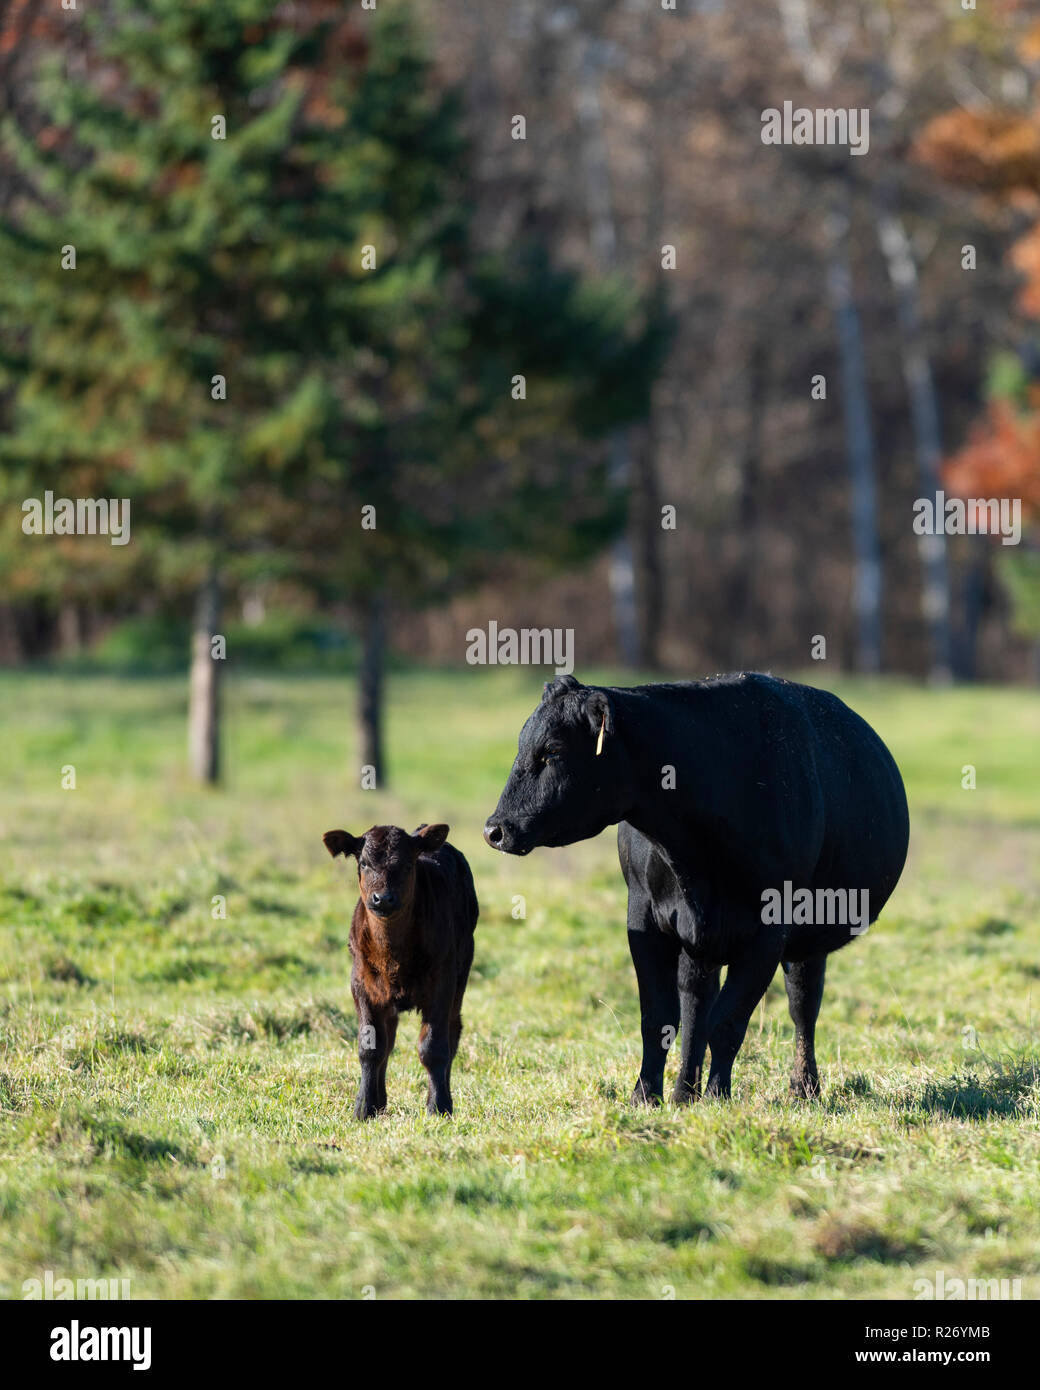 A Black angus cow and her calf on a Minnesota Ranch Stock Photo